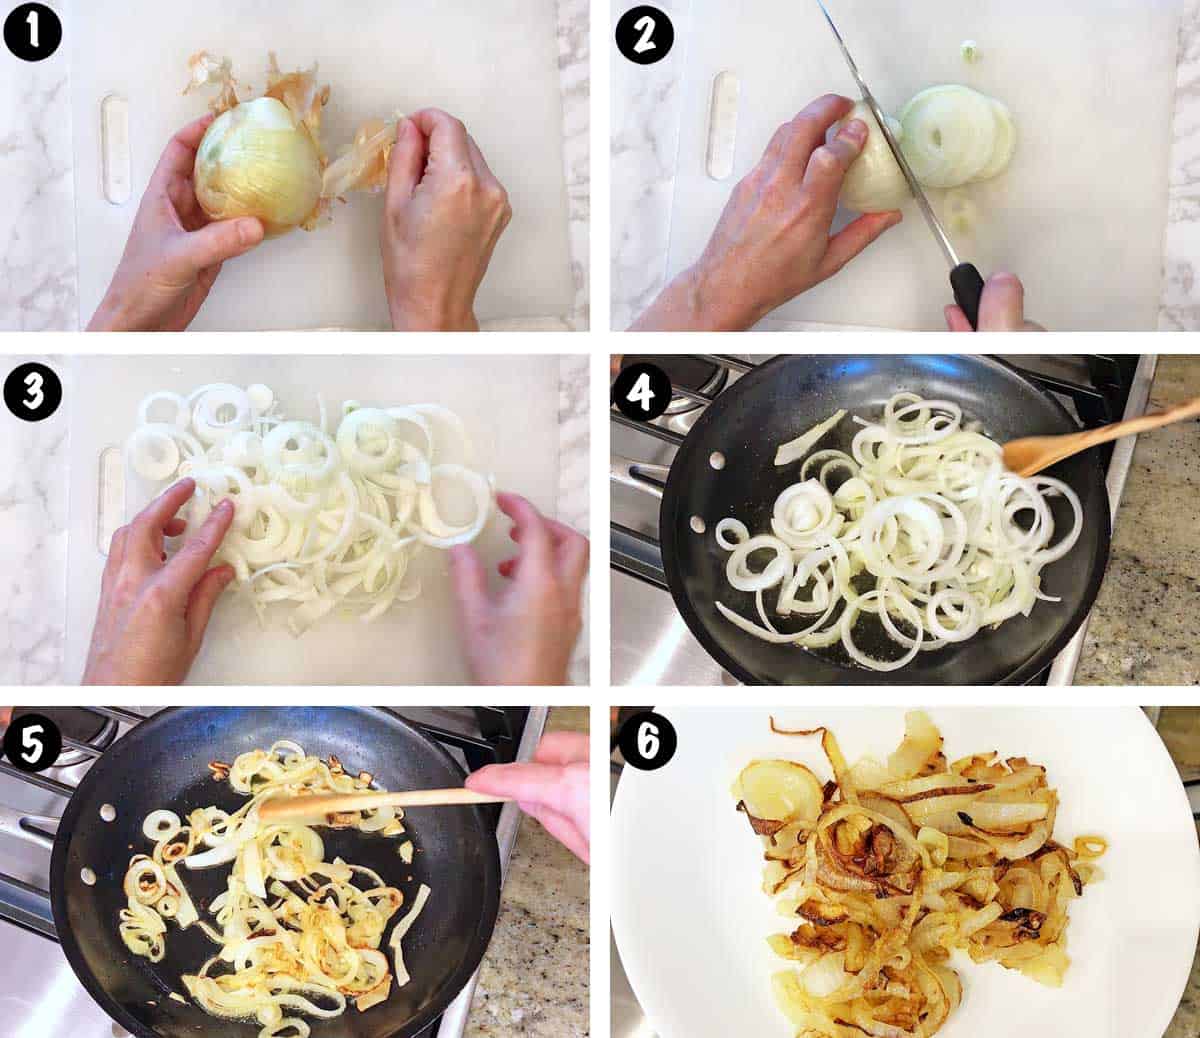 A six-photo collage showing the steps for sauteing onions.